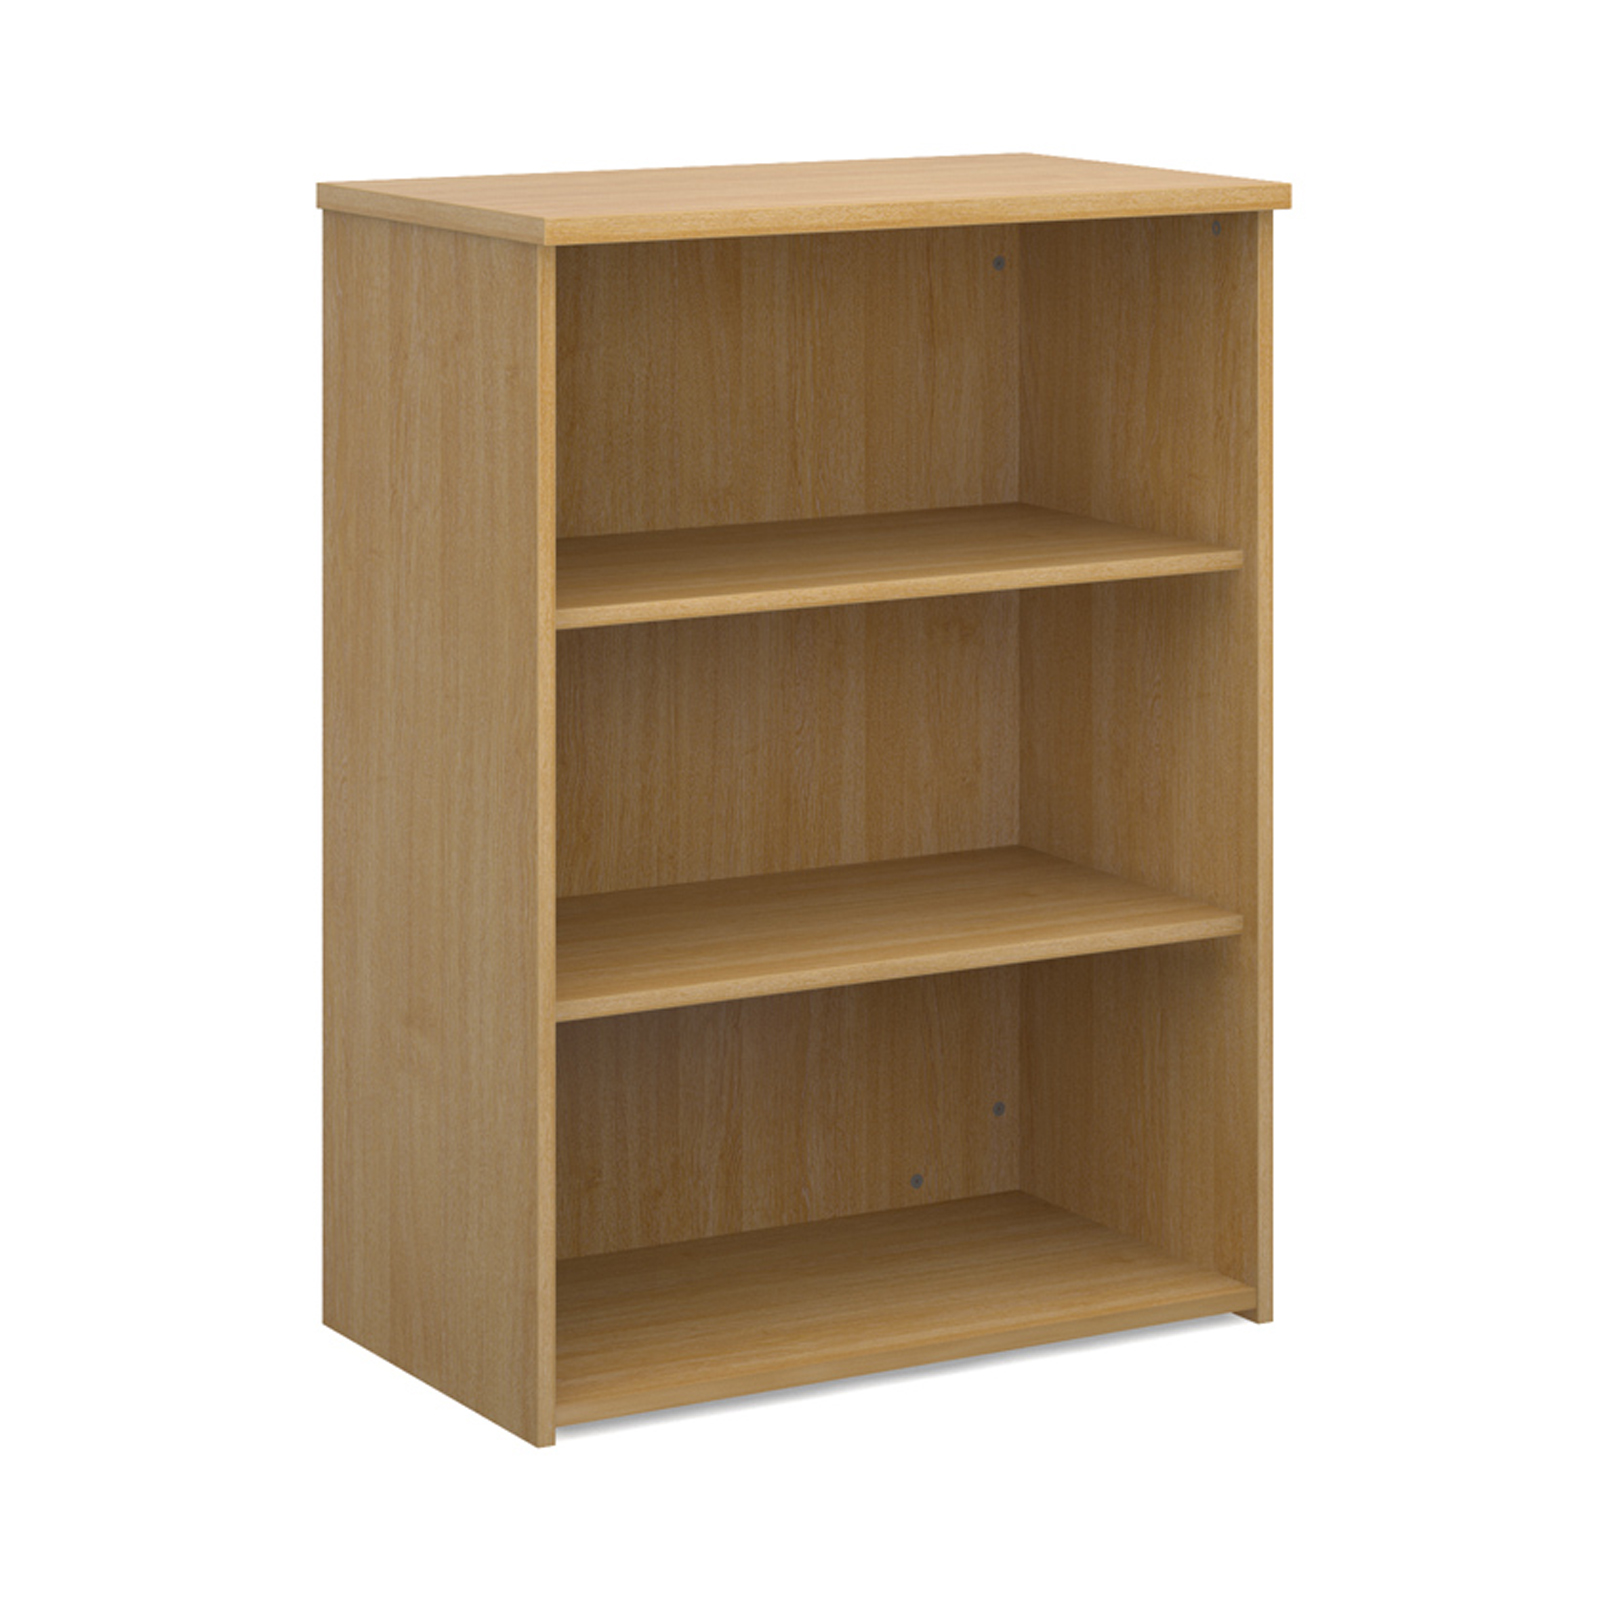 Up To 1200mm High Universal bookcase 1090mm high with 2 shelves - oak